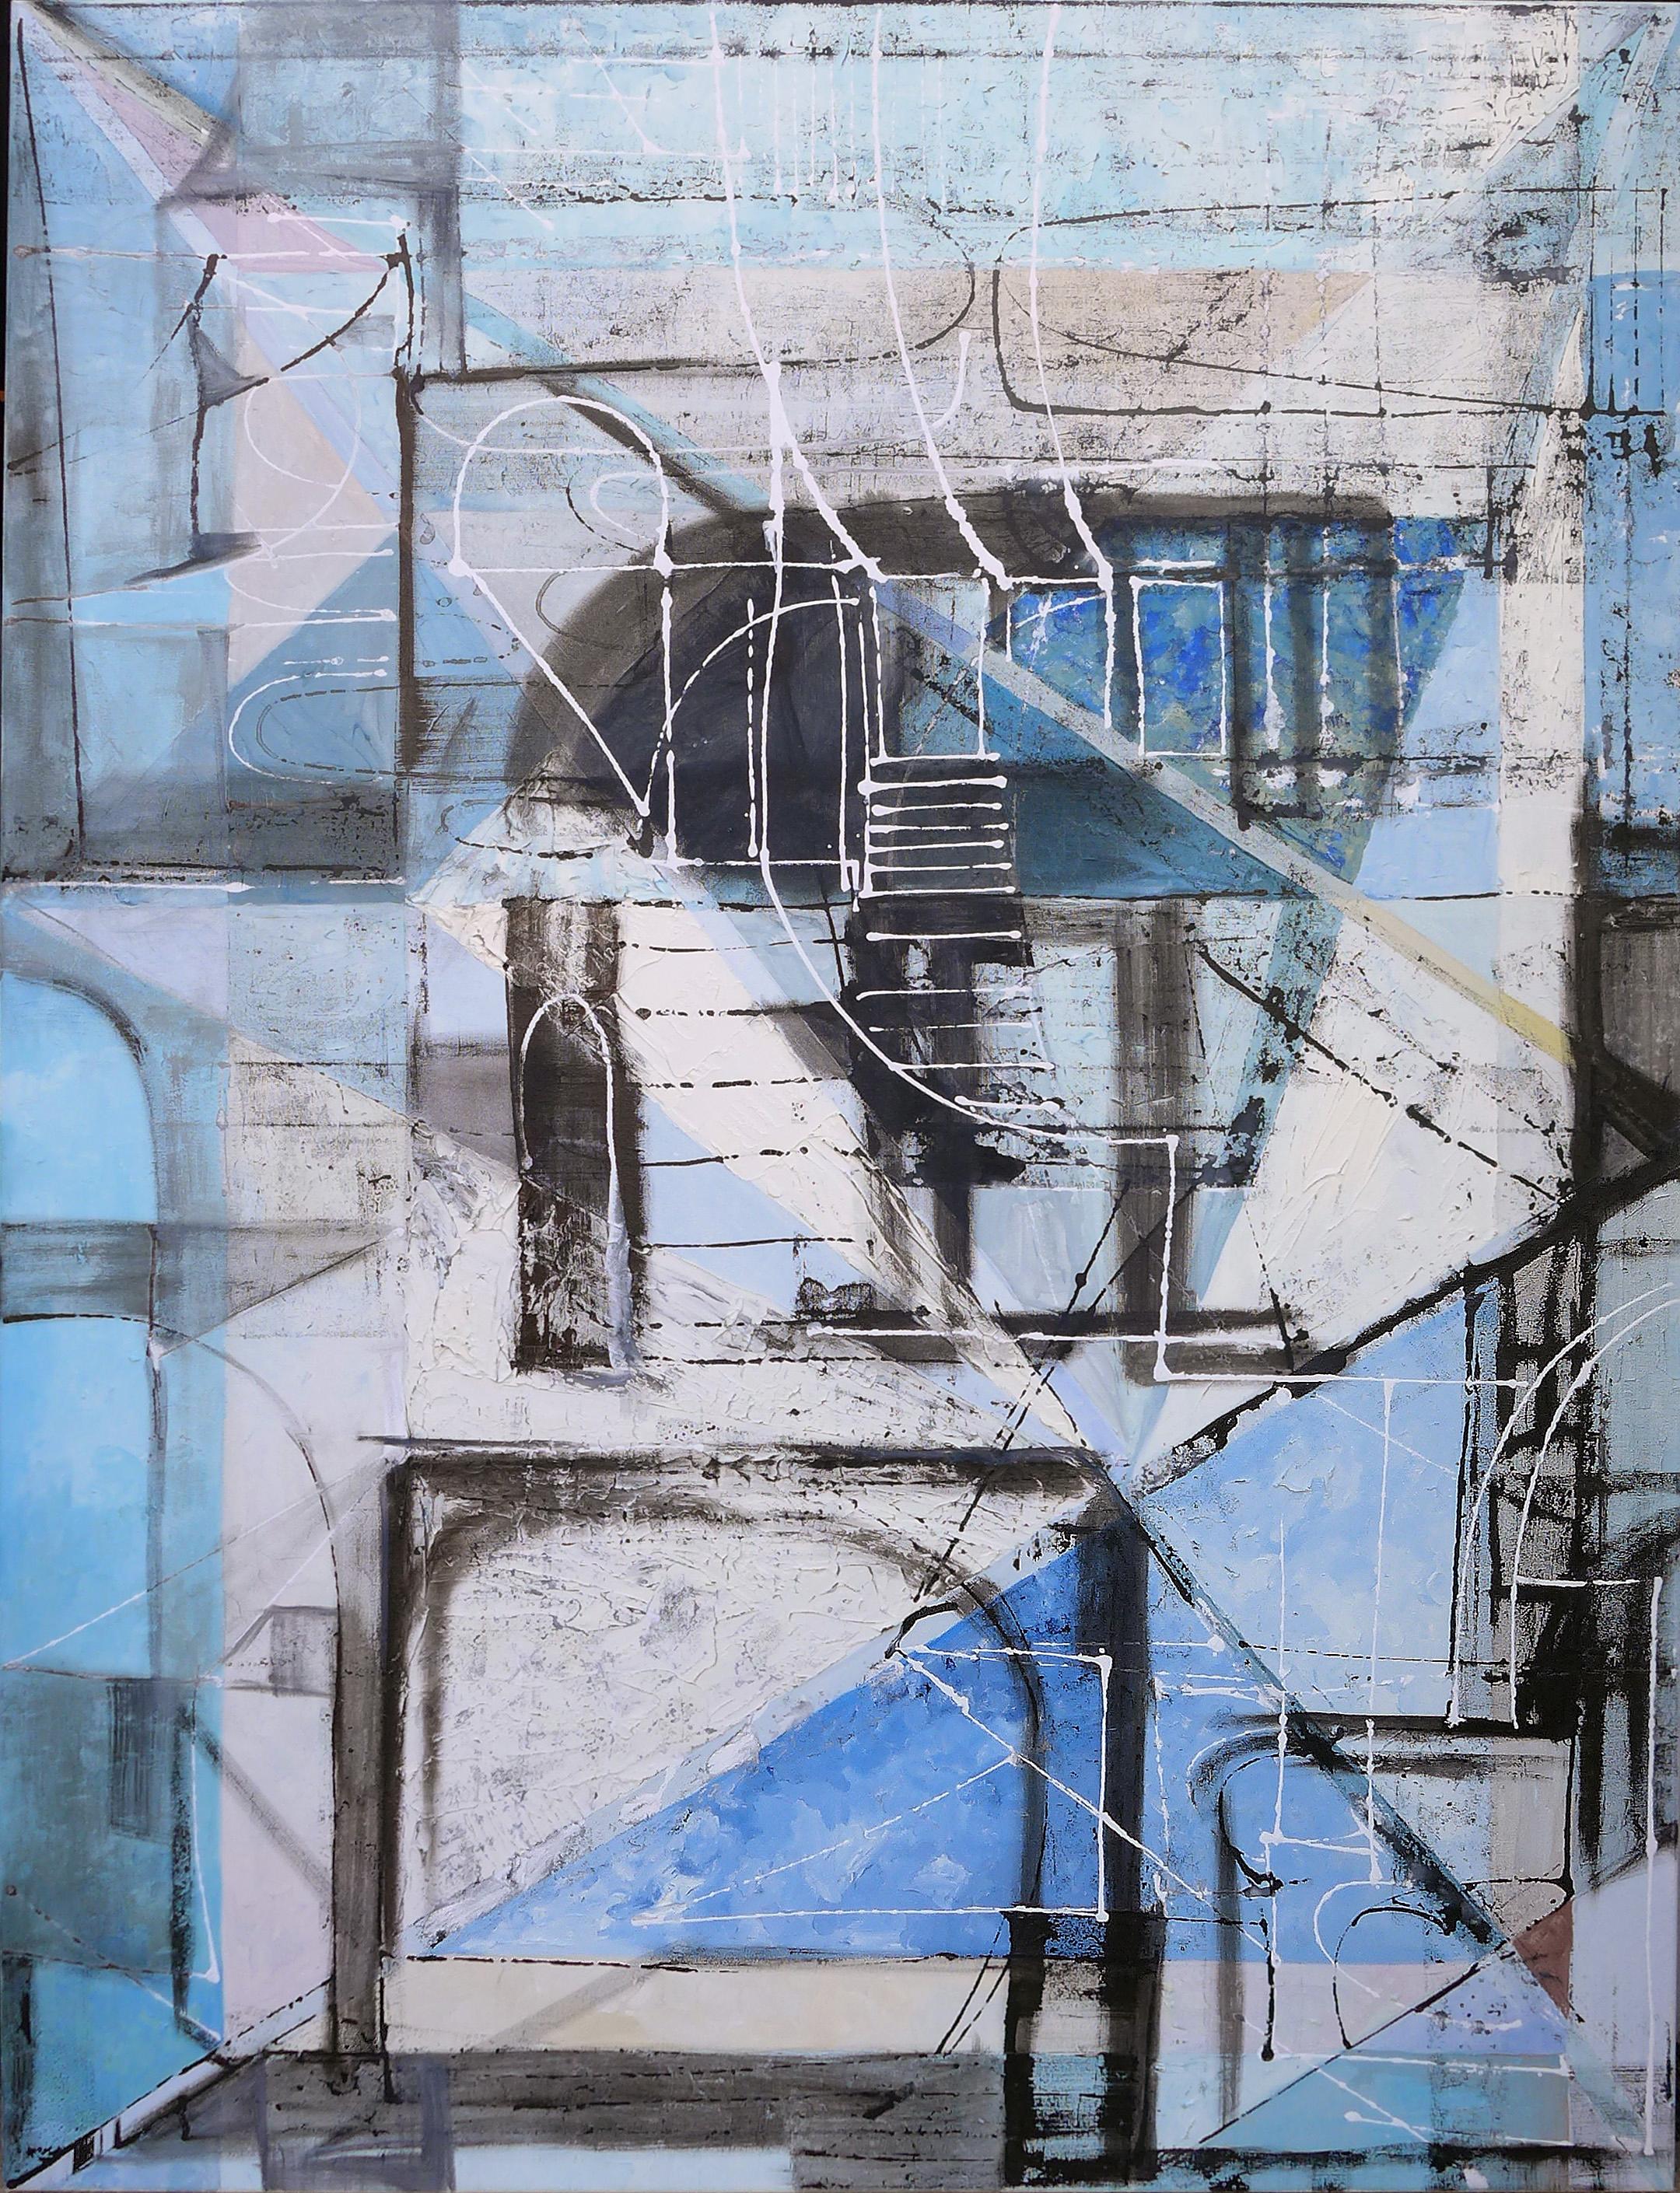 Anna Sudbina Interior Painting - Lost City Blues 01 - Large contemporary abstract expressionist painting in blue